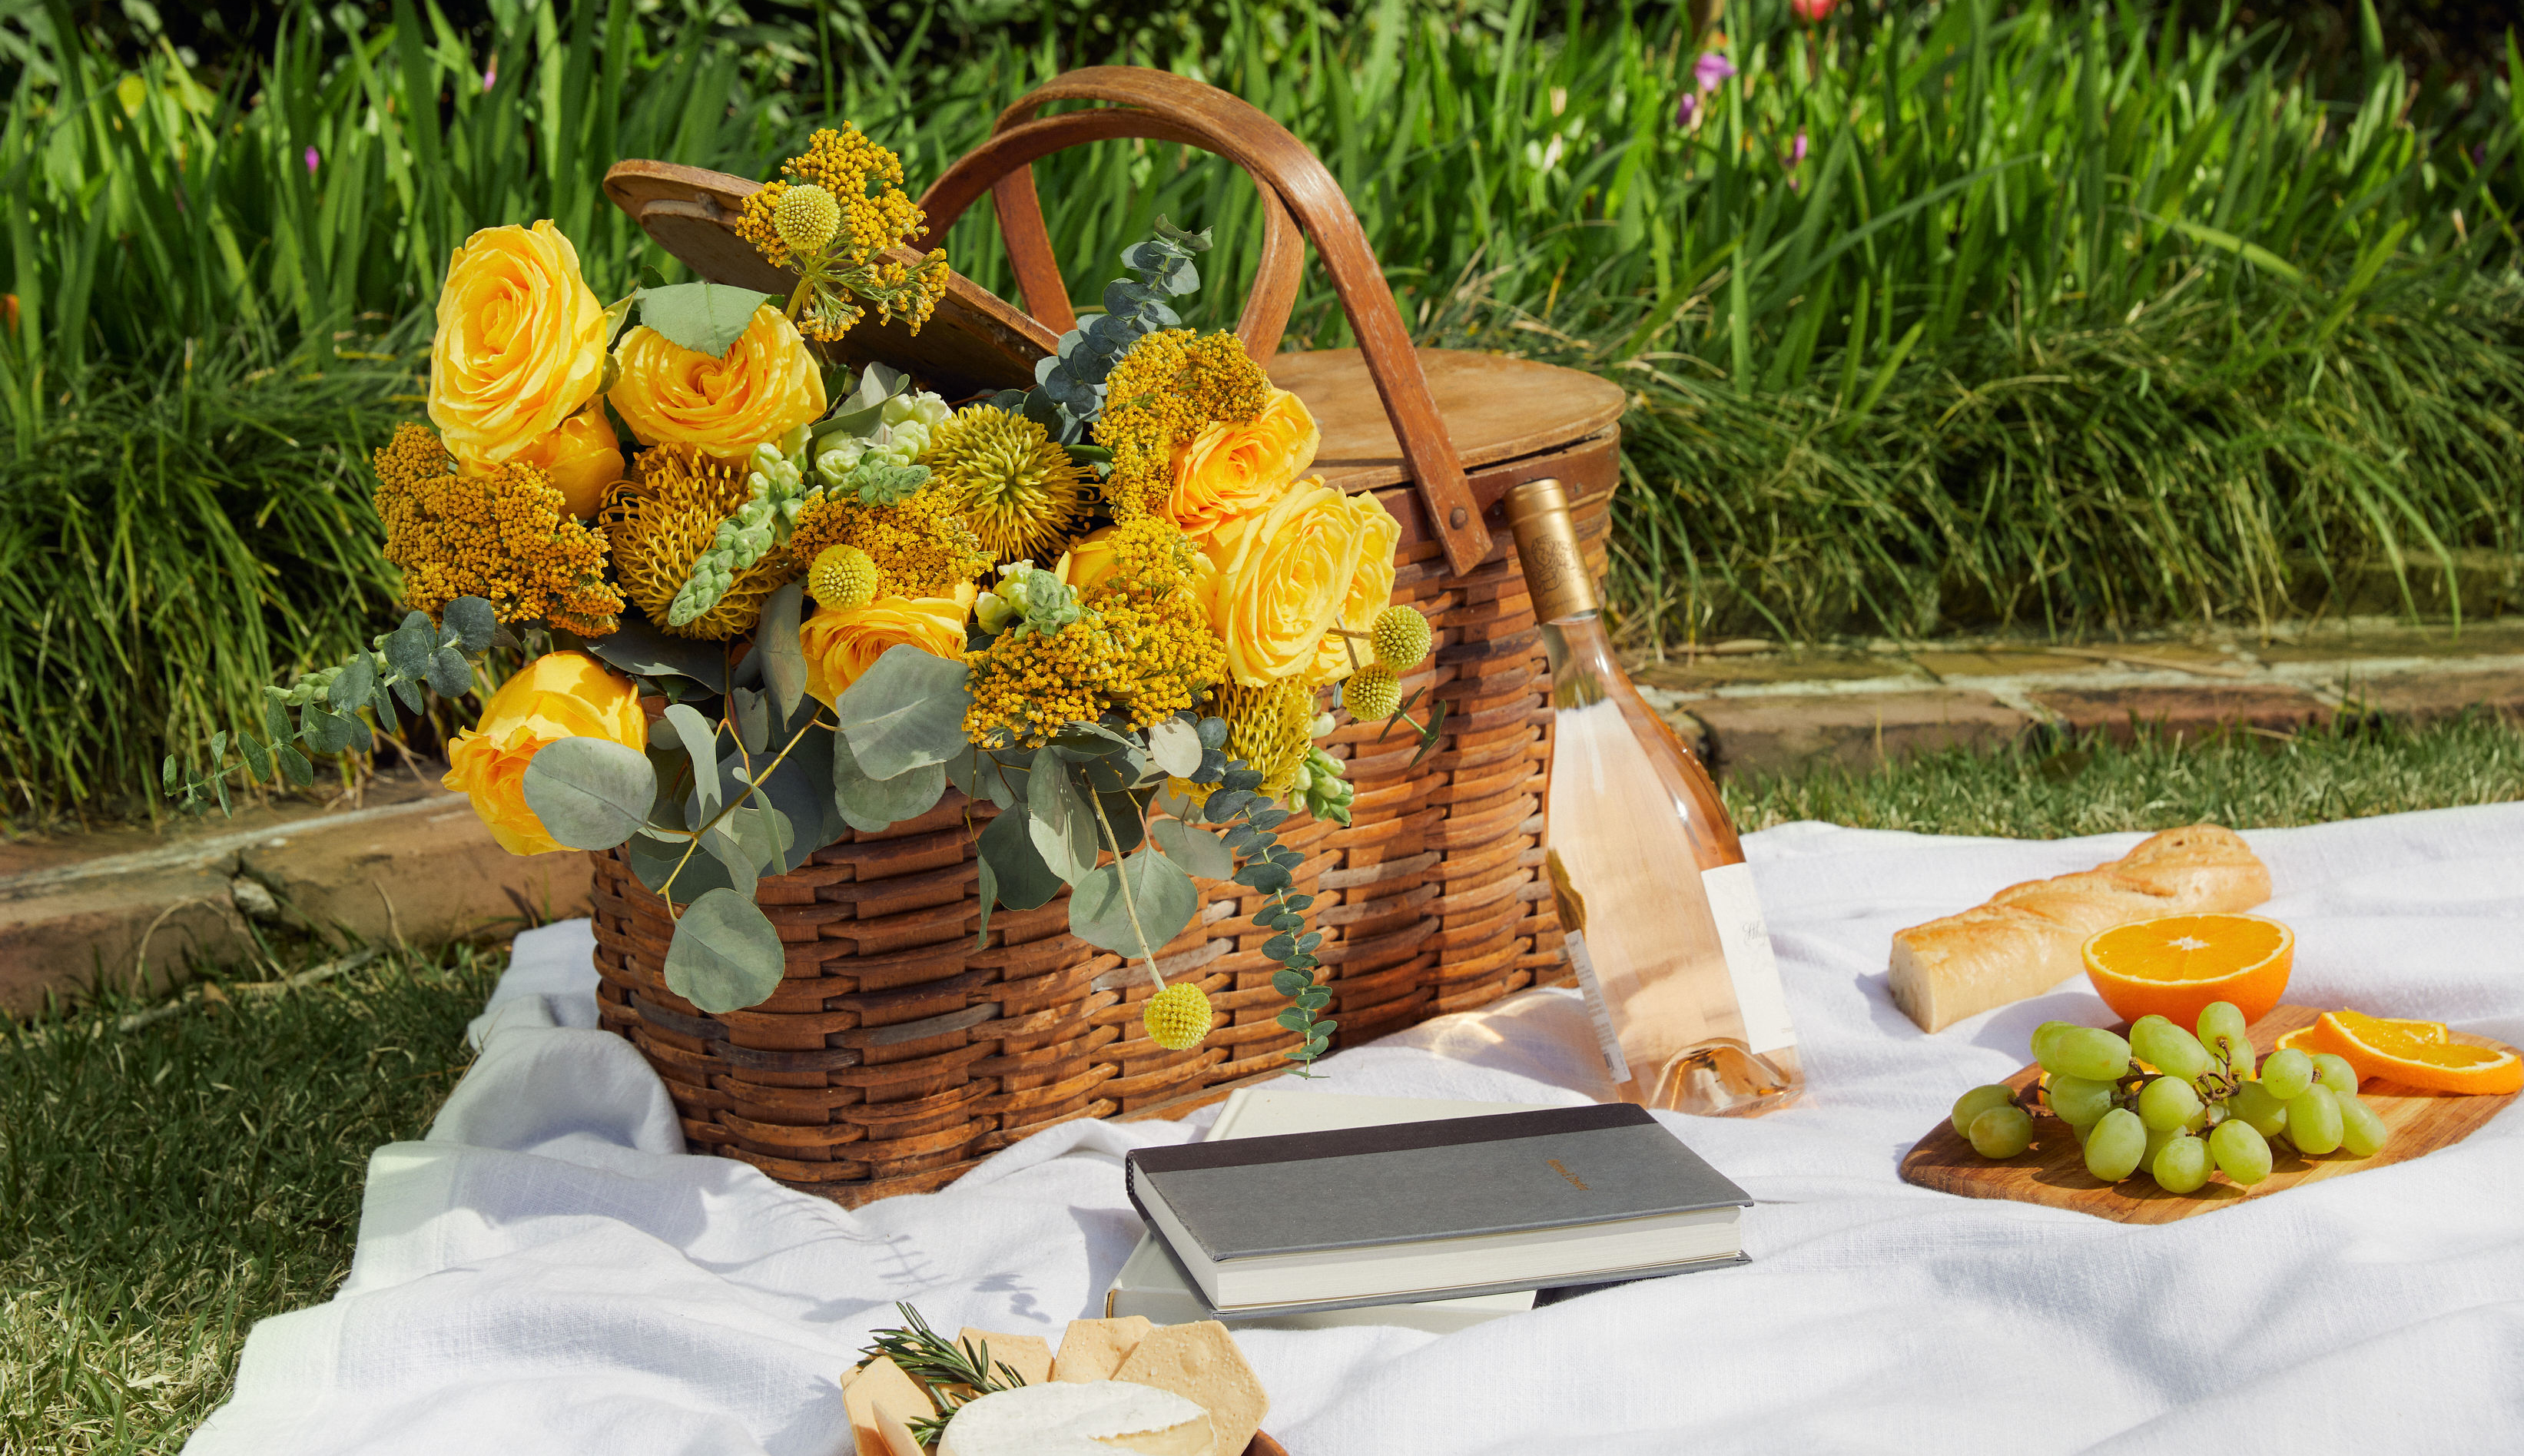 Bouquet of yellow flowers in a picnic basket